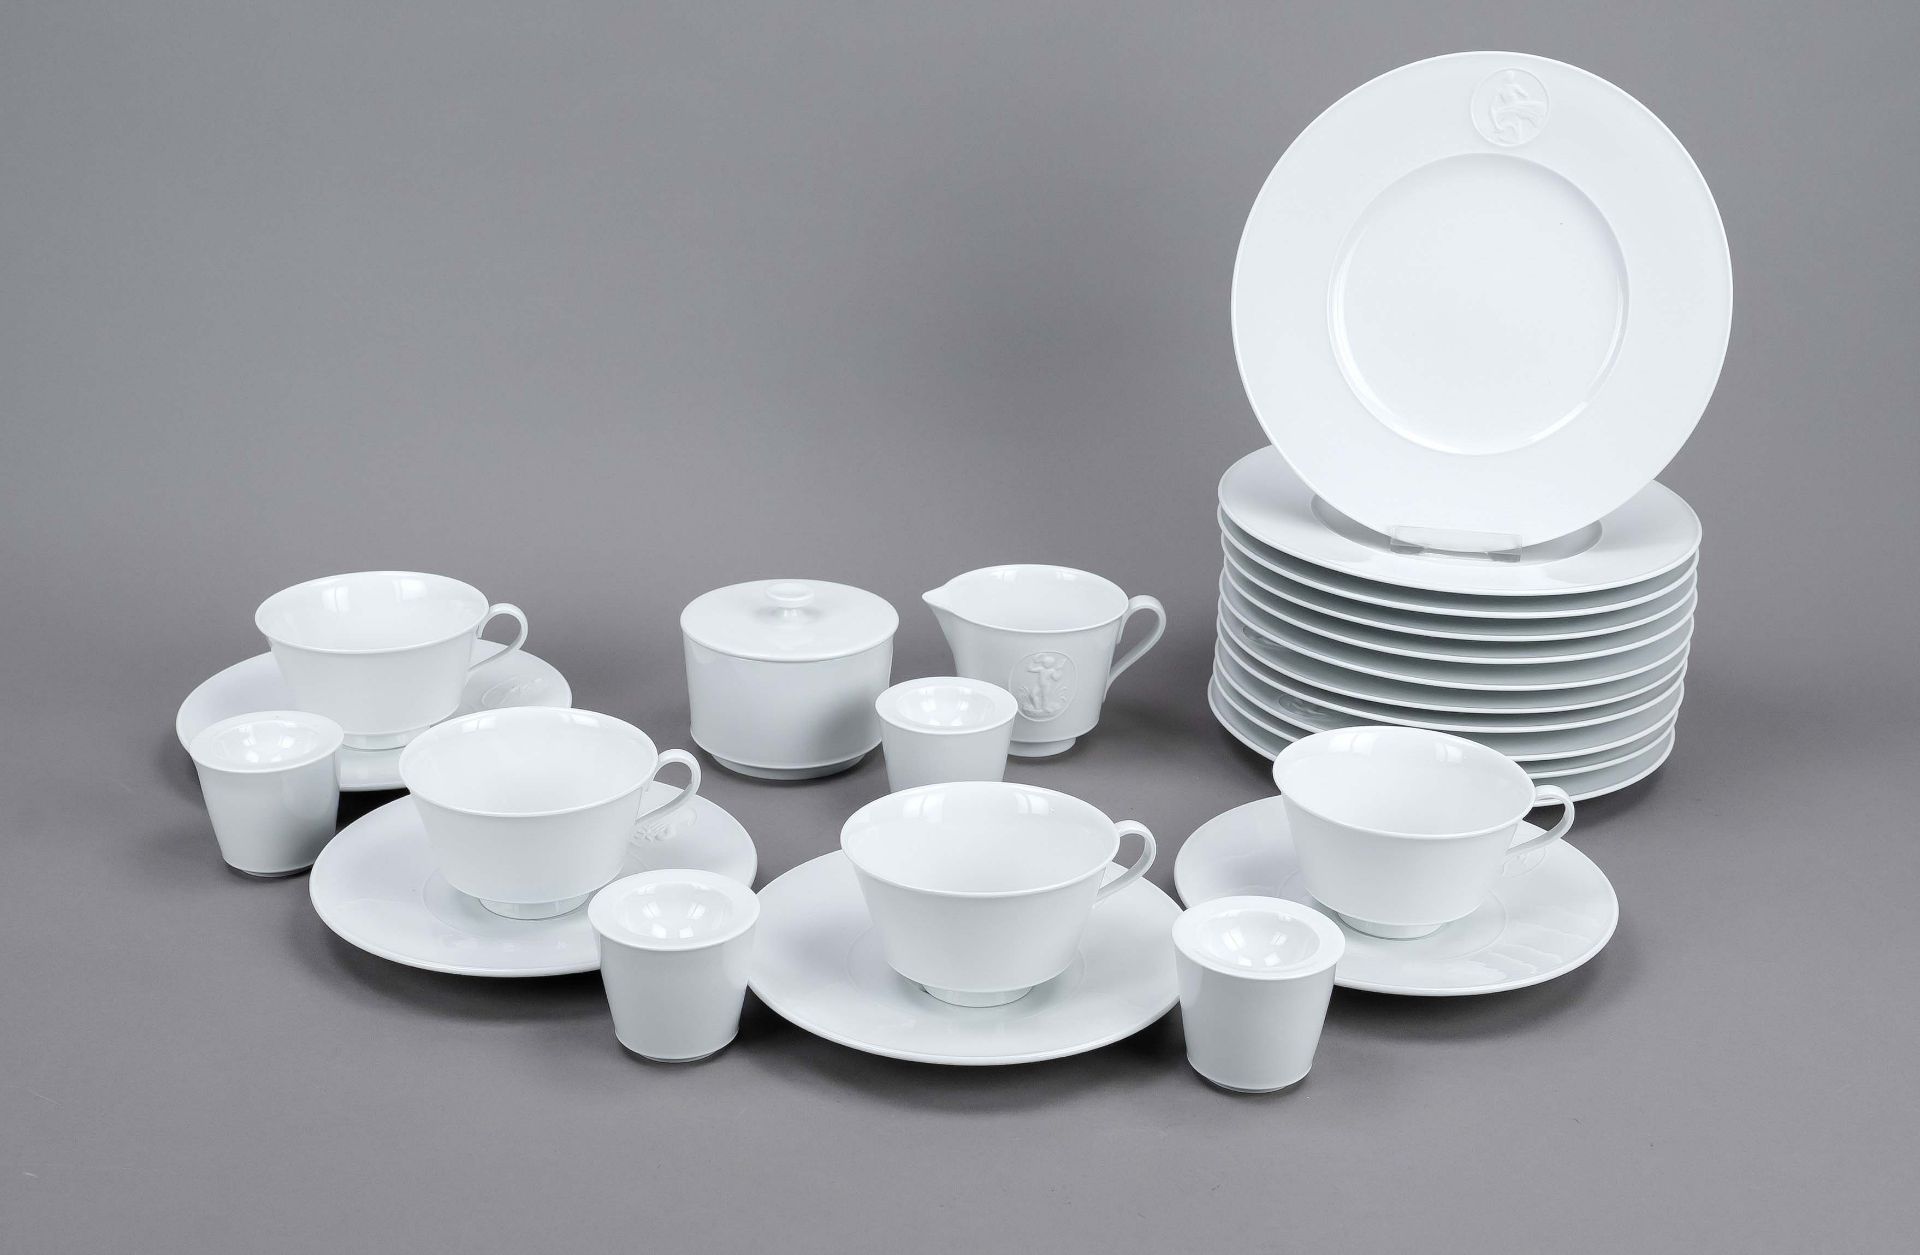 Breakfast service for 4-11 persons, 39-piece, KPM Berlin, marks after 1993, 1st choice, white,